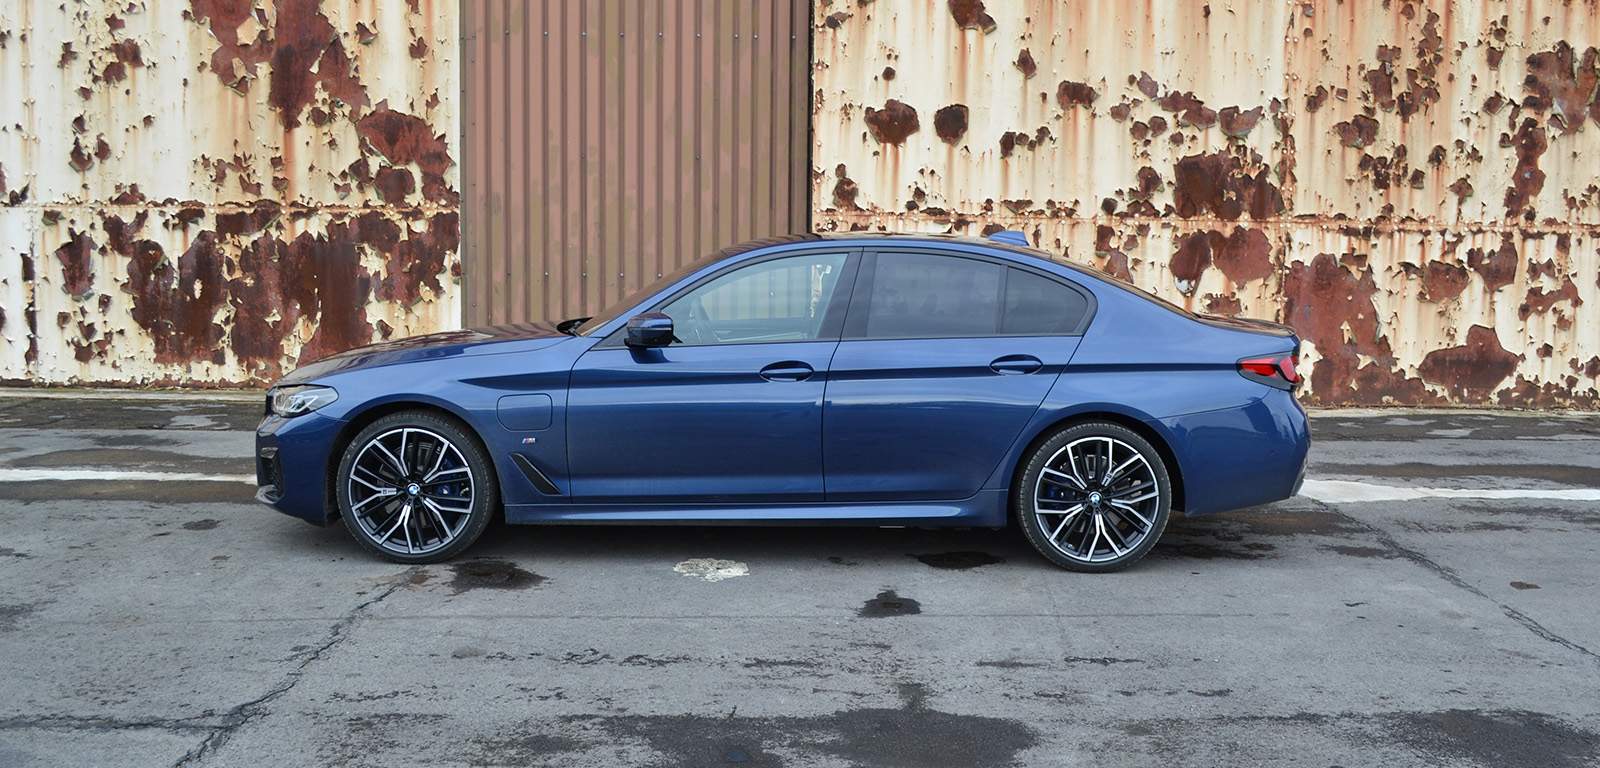 Facelifted BMW 530e M Sport Saloon